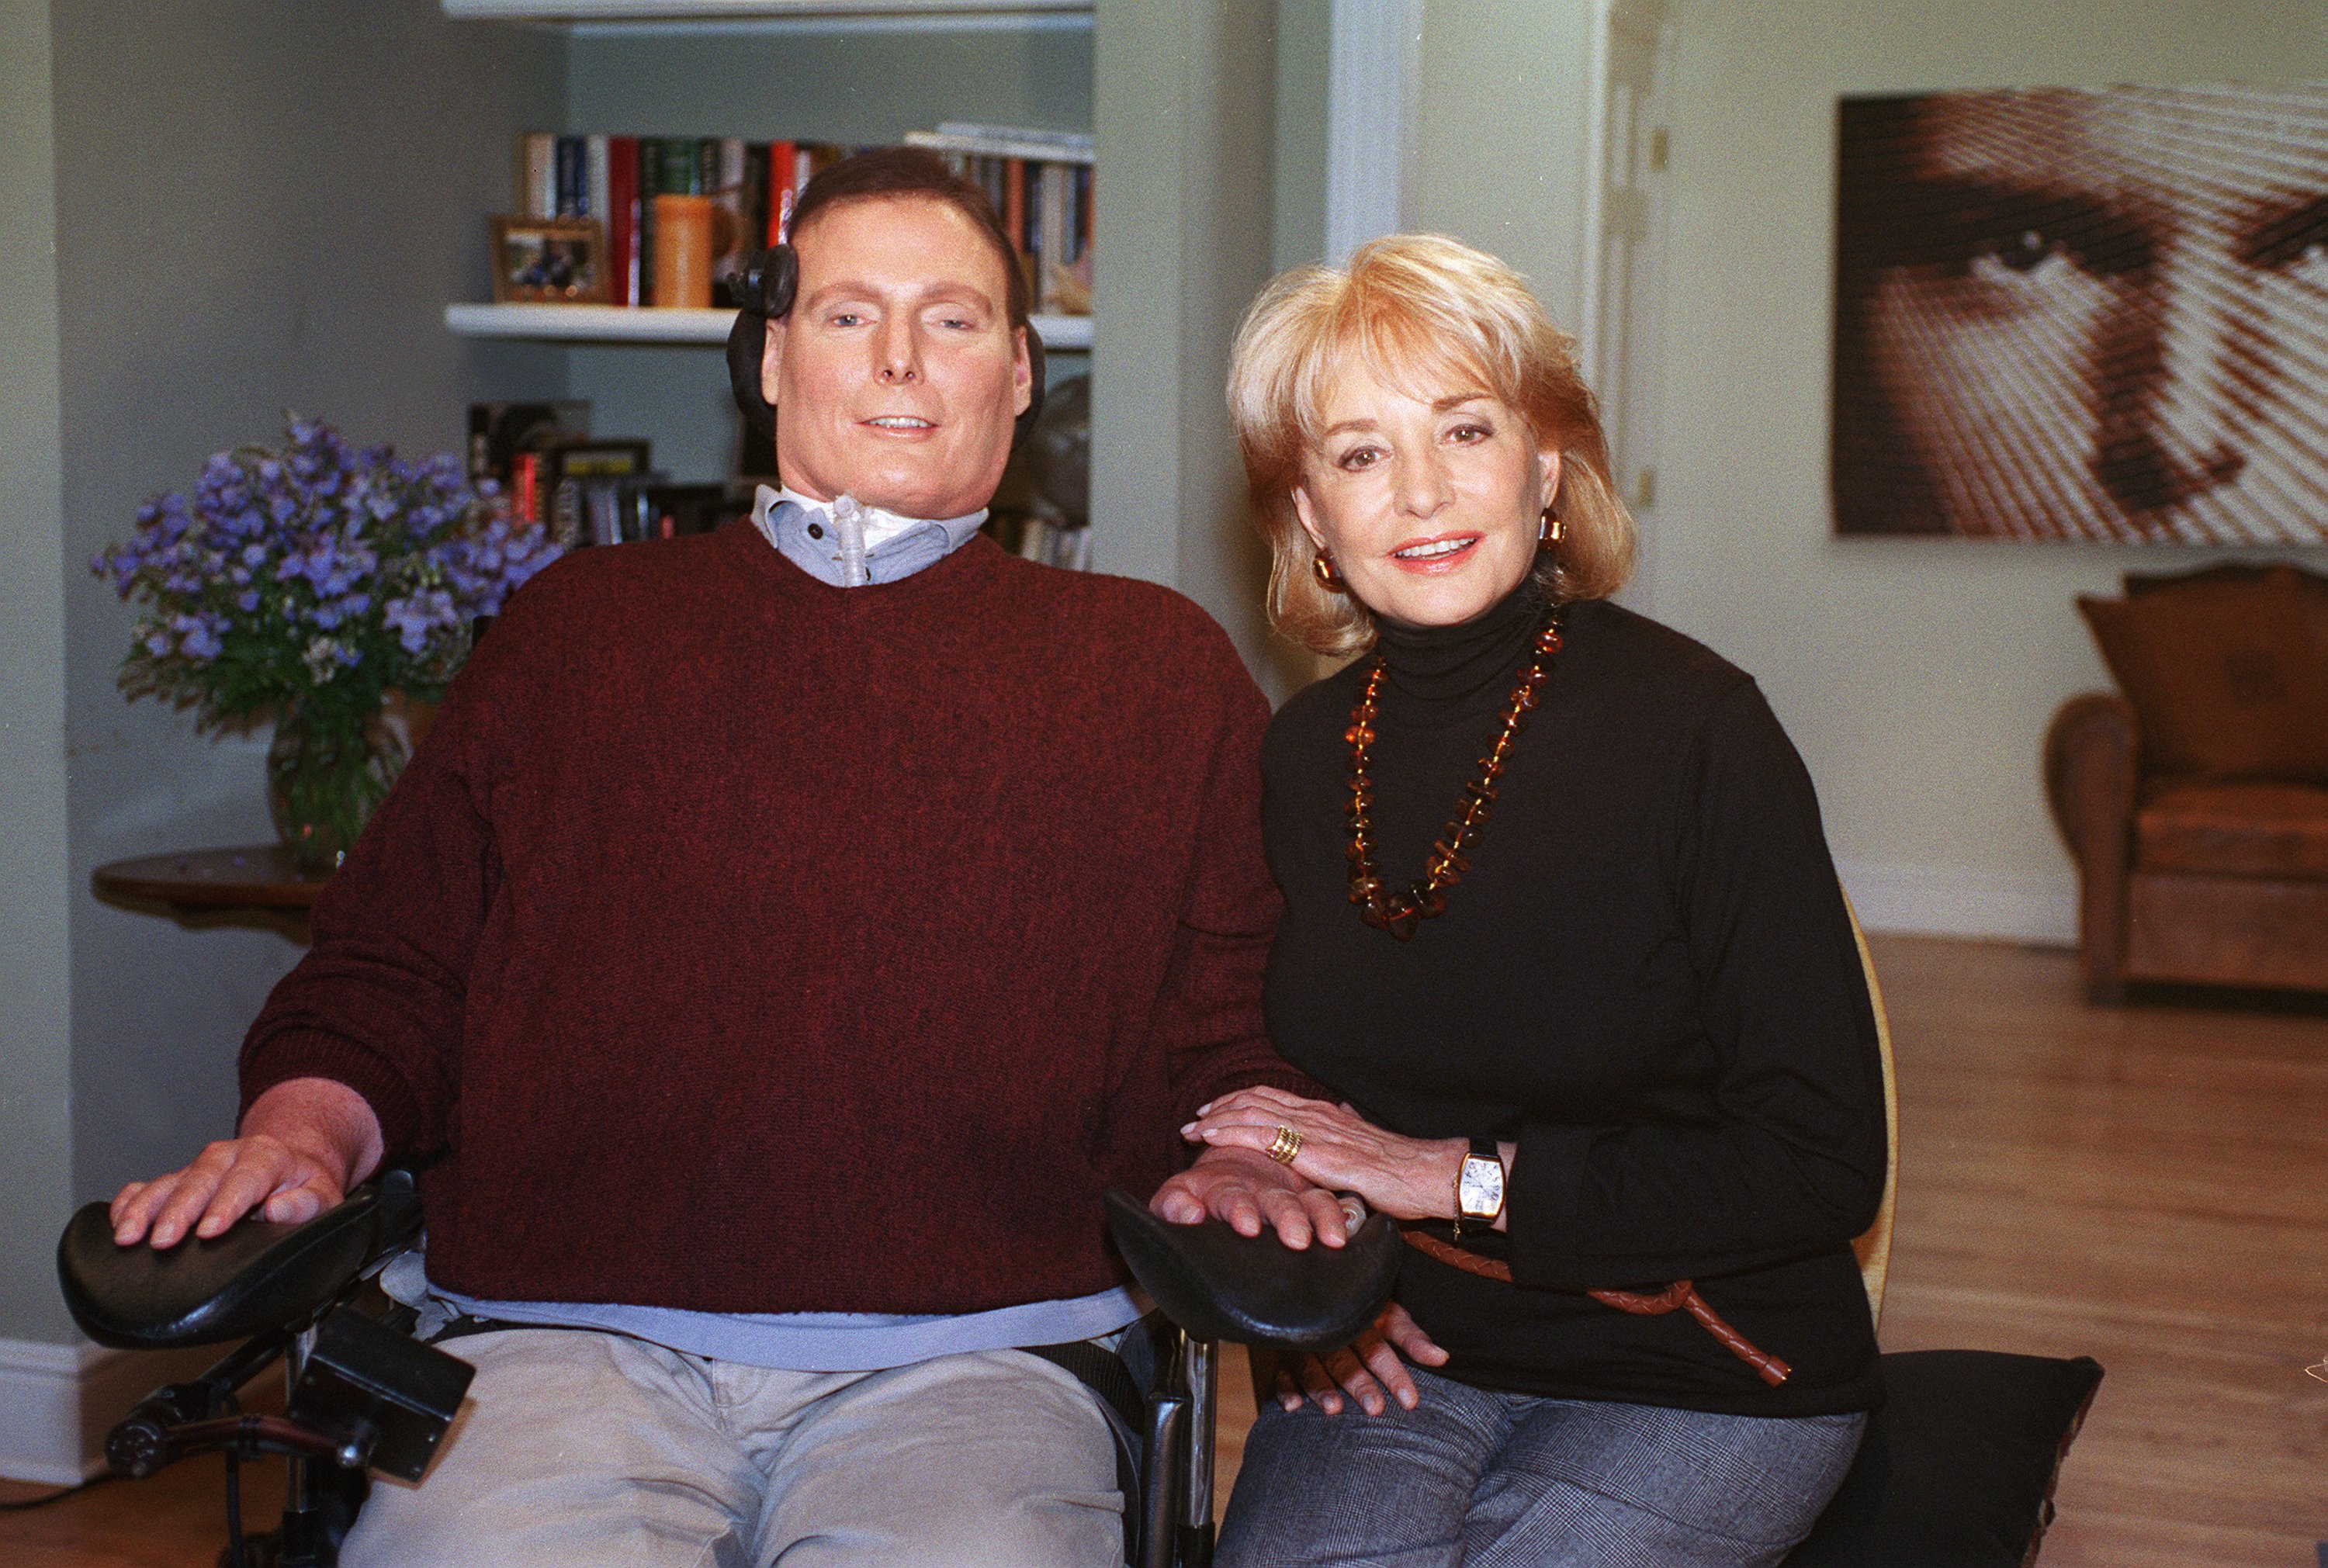 Barbara Walters with Christopher Reeve at his upstate New York home on September 7, 2002. / Source: Getty Images